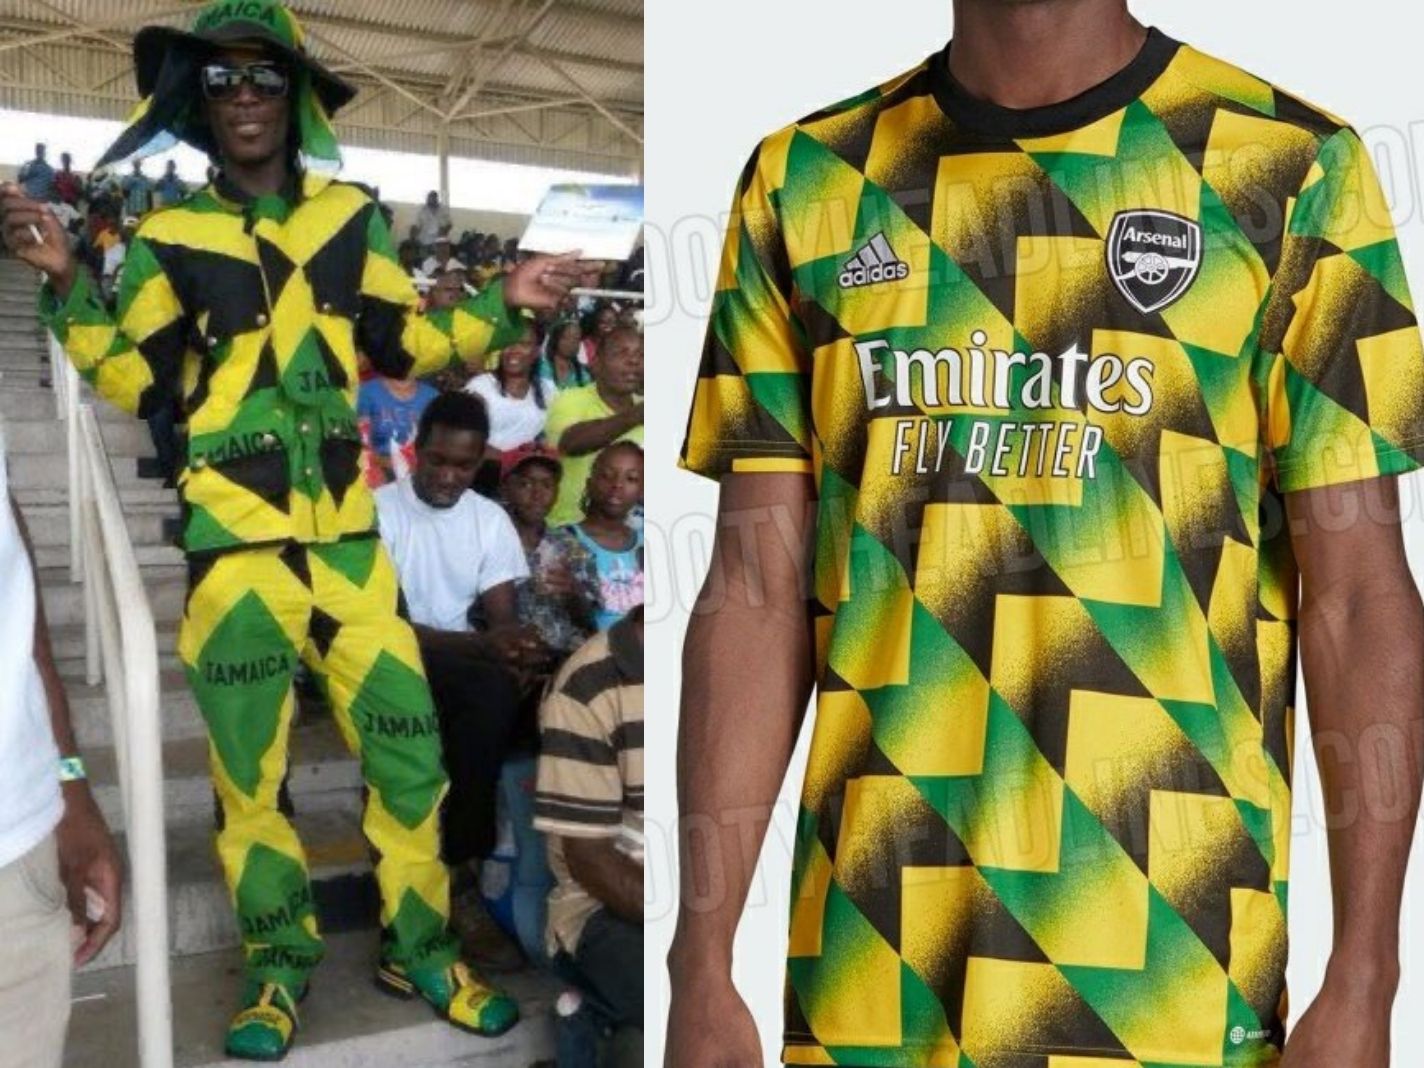 New Arsenal prematch shirt for next seems inspired by the Jamaican flag